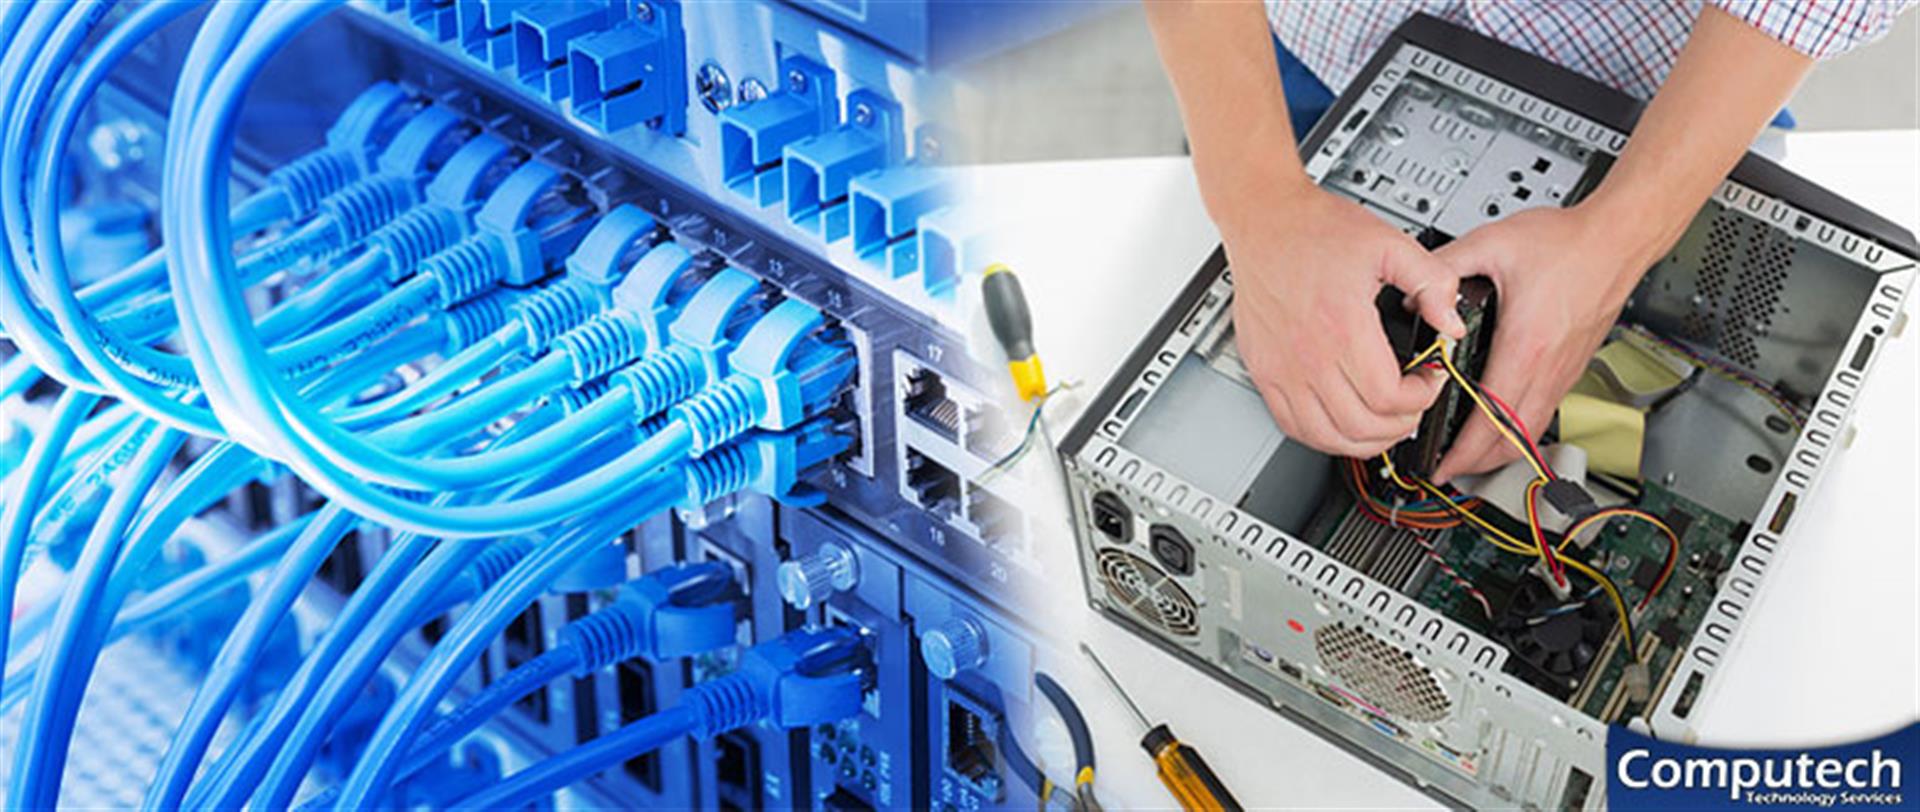 Evergreen Alabama Onsite Computer PC & Printer Repair, Networking, Telecom & Data Low Voltage Cabling Solutions